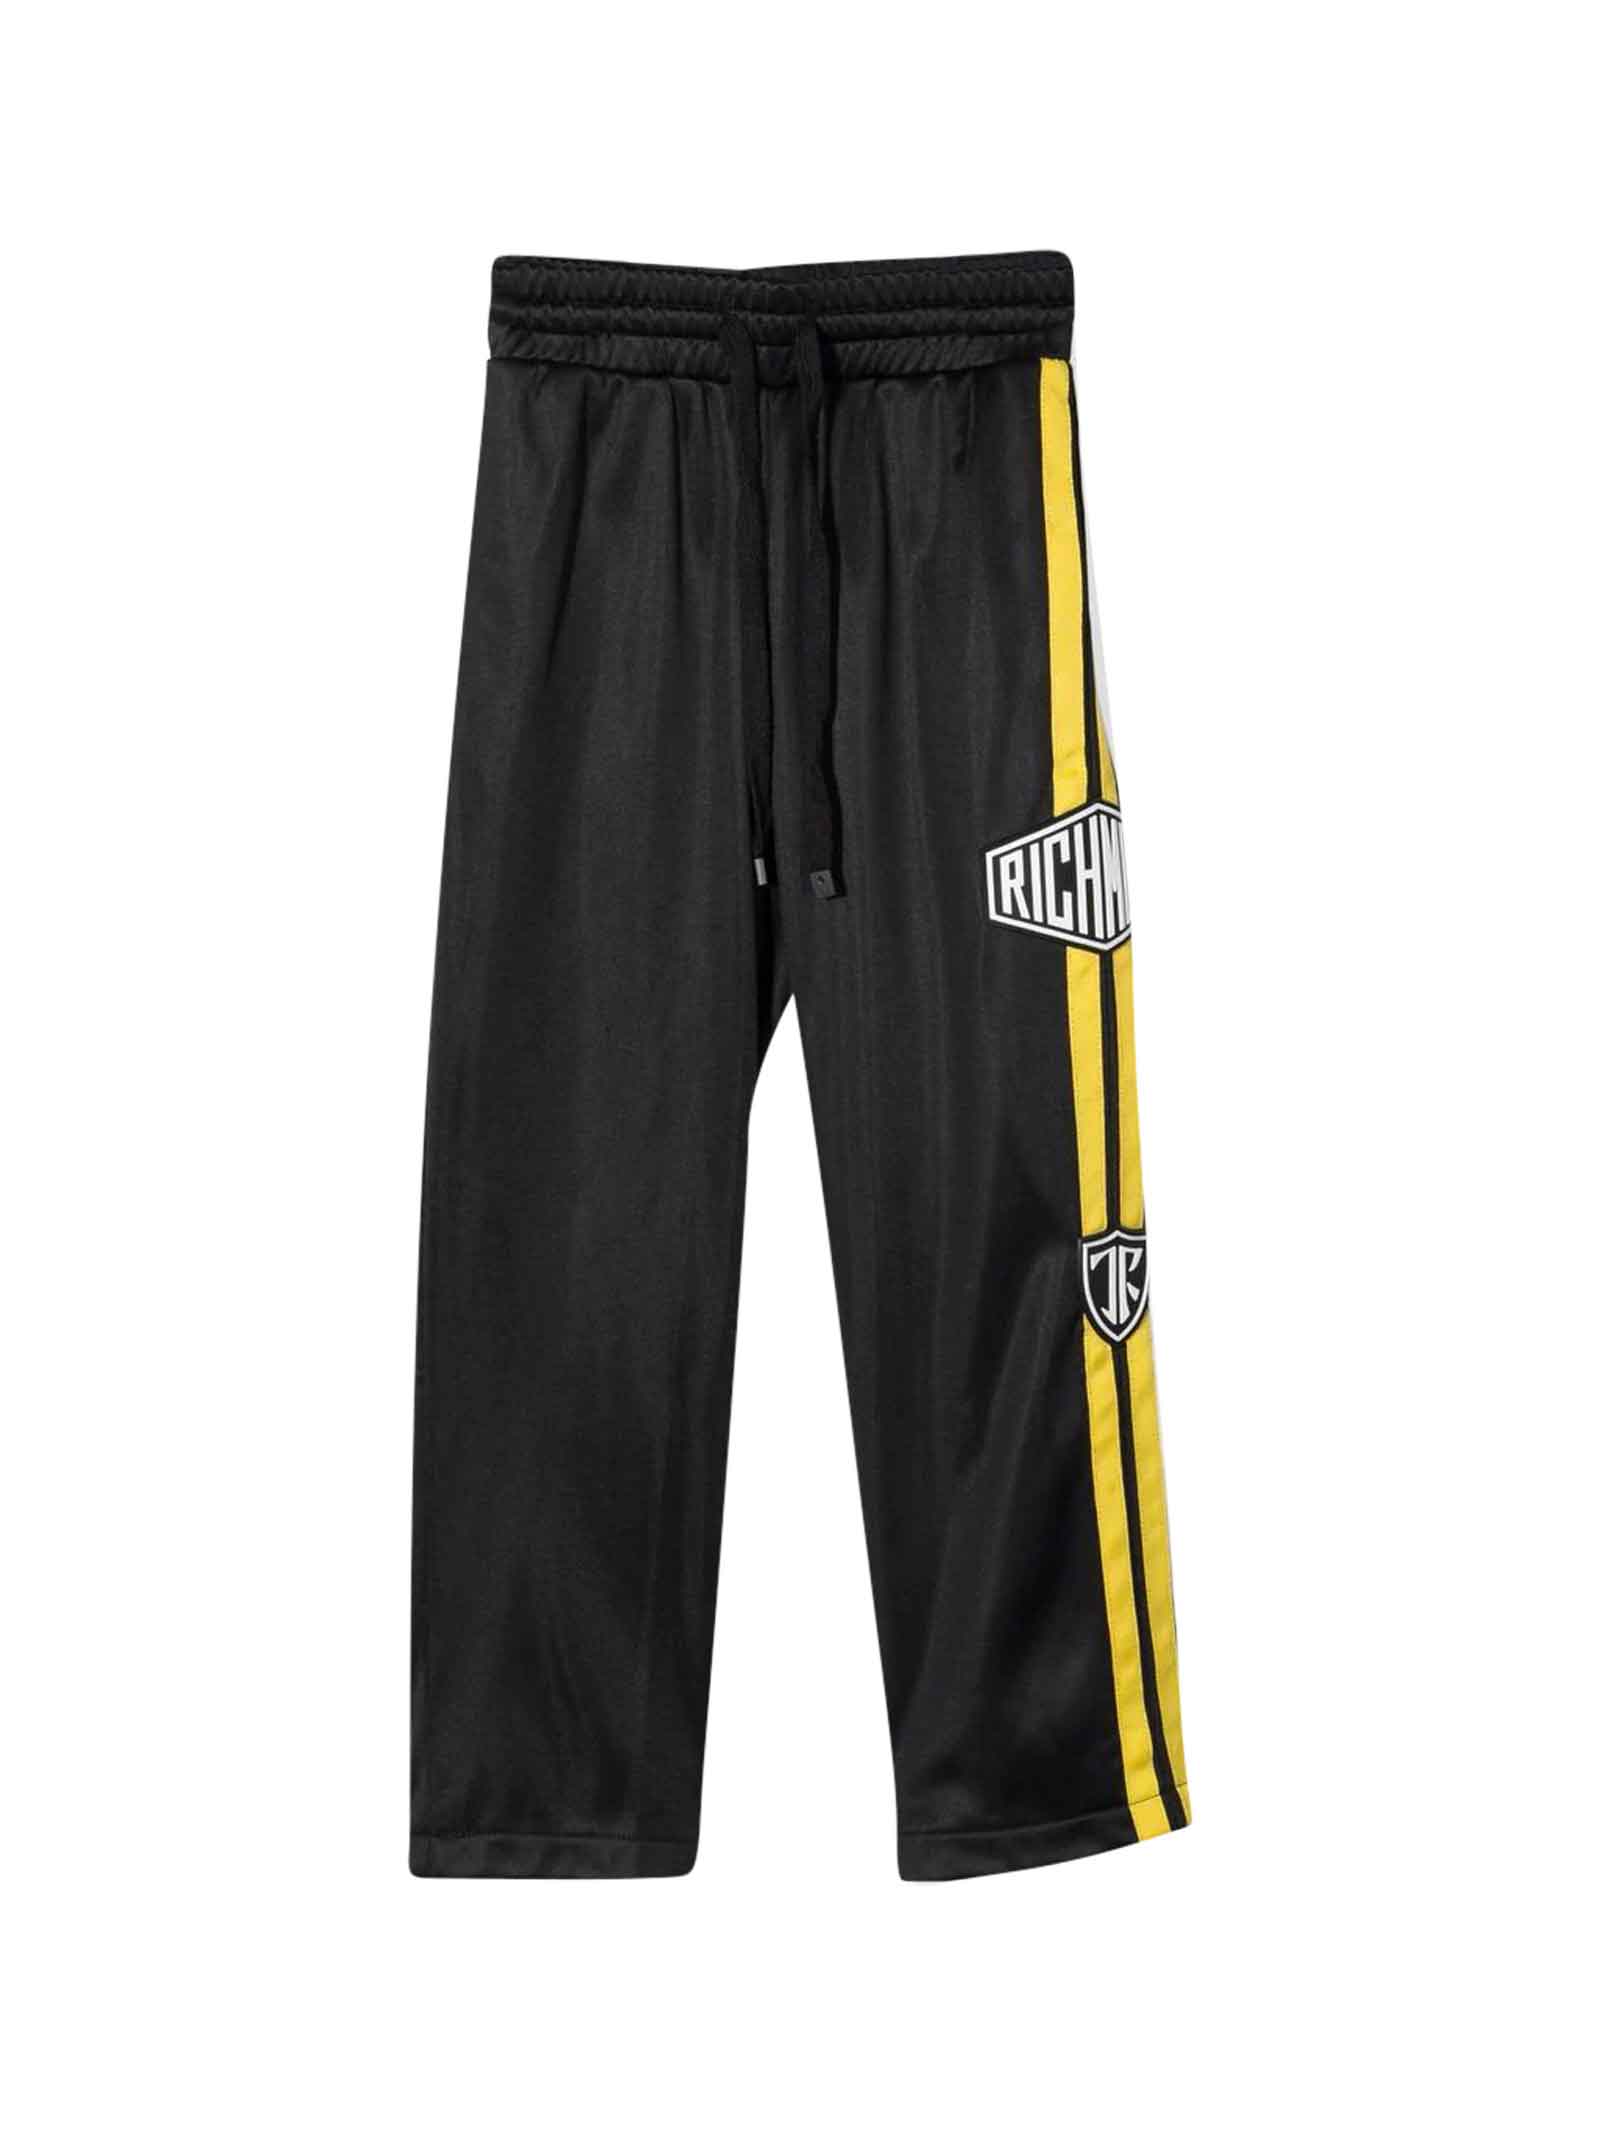 John Richmond Black Trousers With Yellow Side Bands